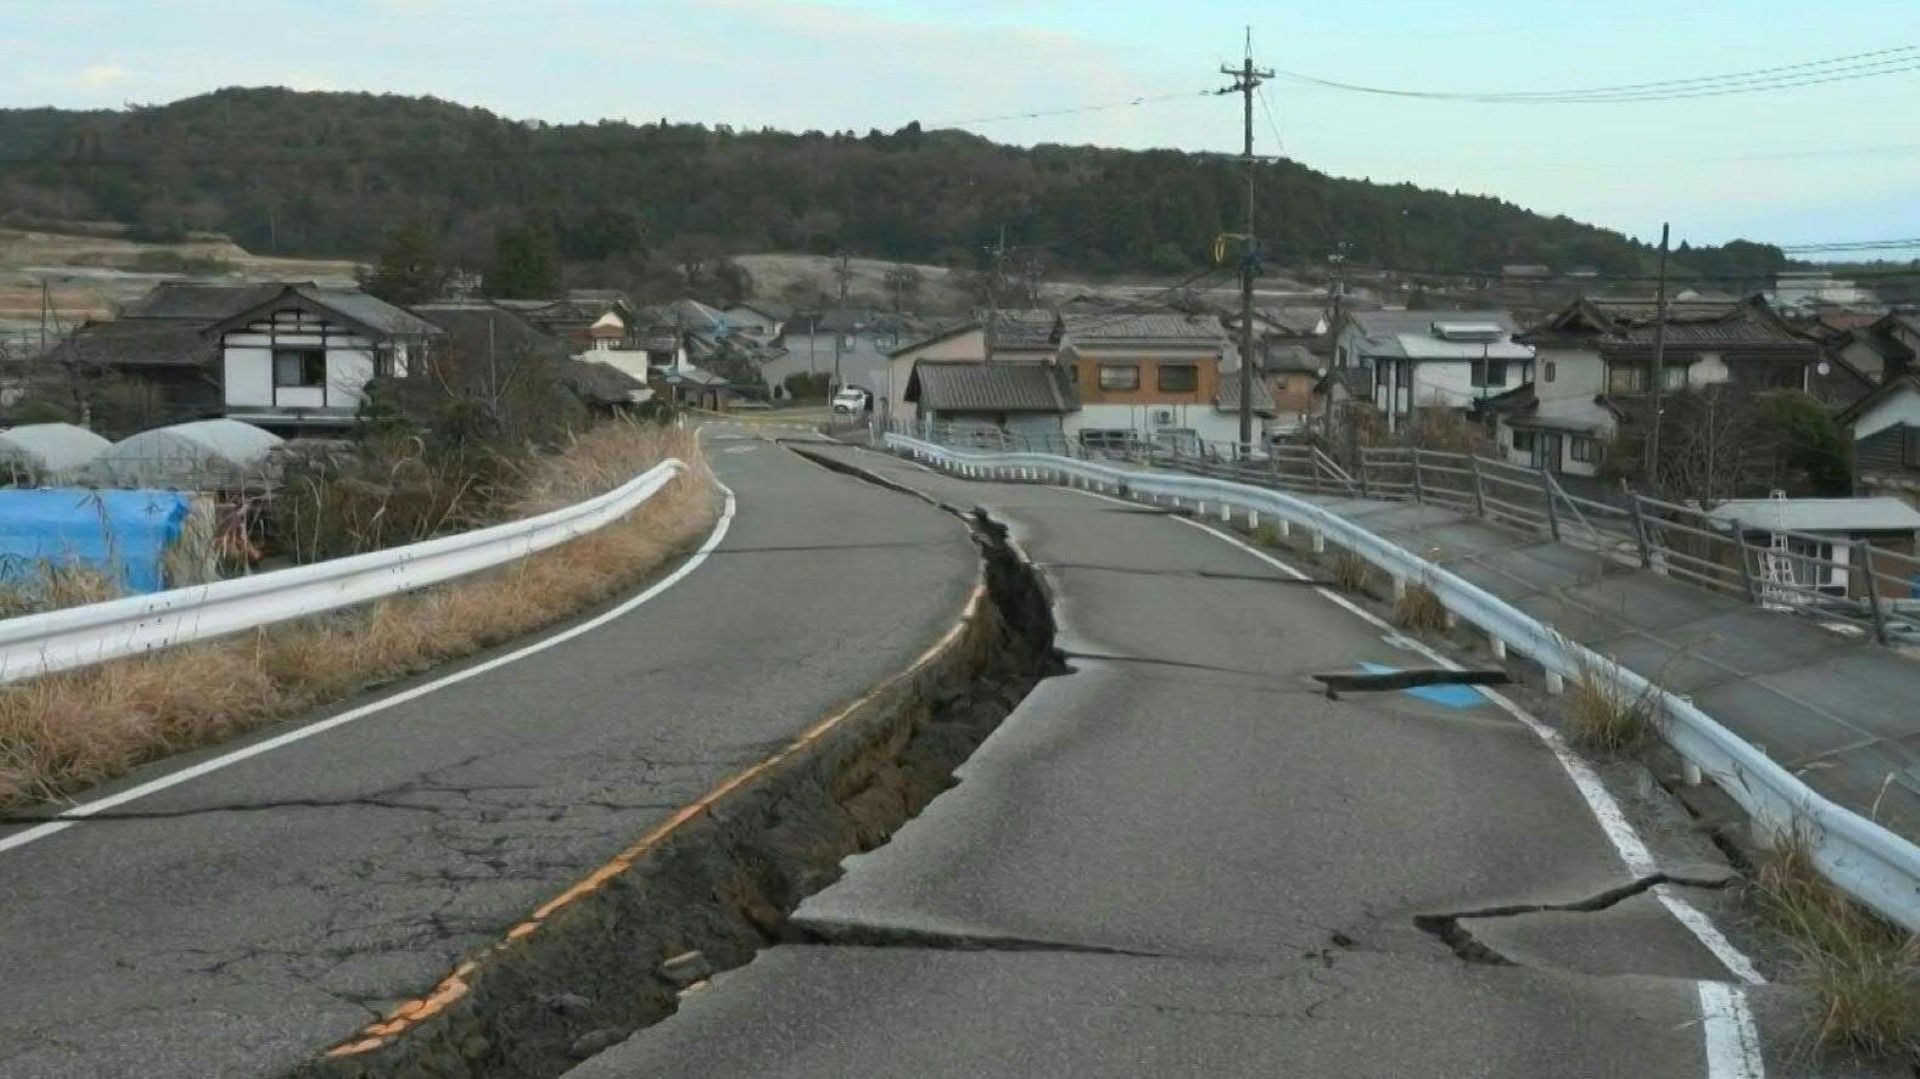 Damaged roads, buildings in Japan's Ishikawa prefecture after earthquake